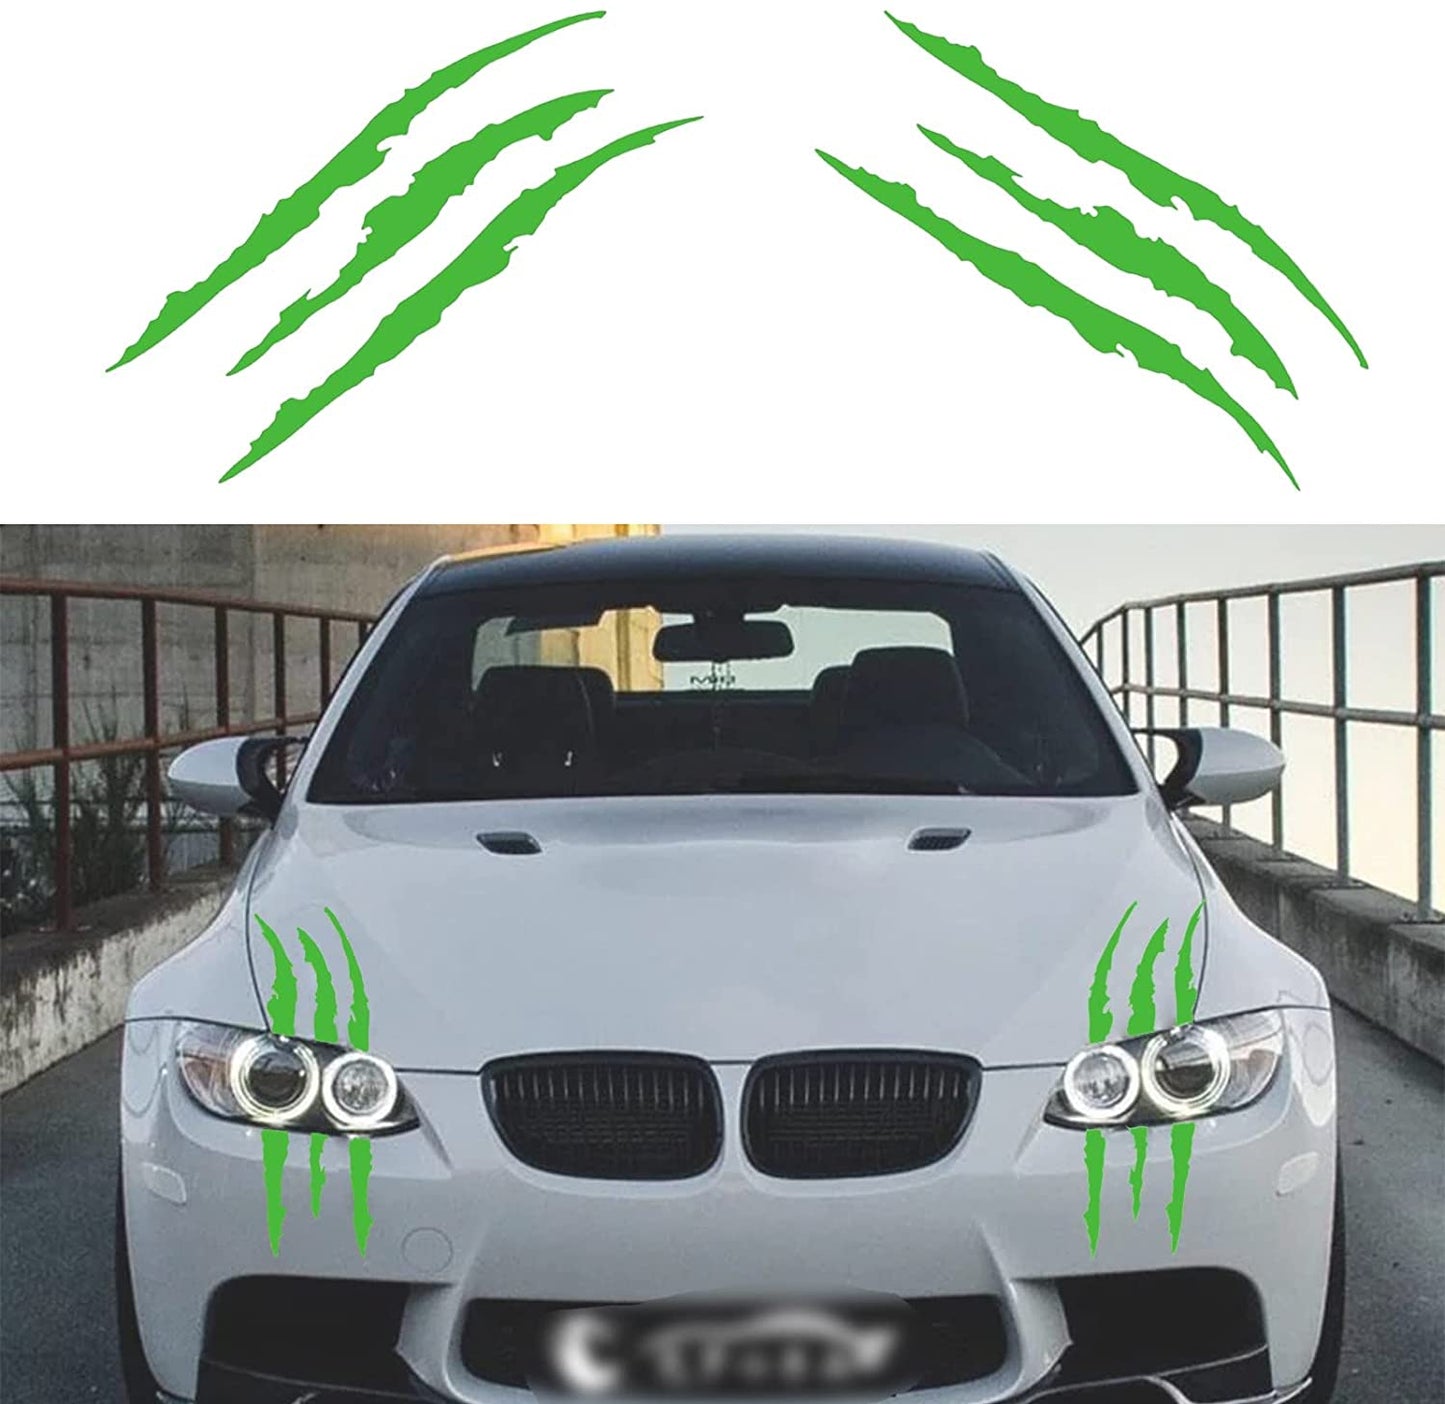 2 Piece Car Decal Sticker,Claw Marks Headlight Marks Decal,Vinyl car Exterior Accessories Decal Uniserval Fit Blue